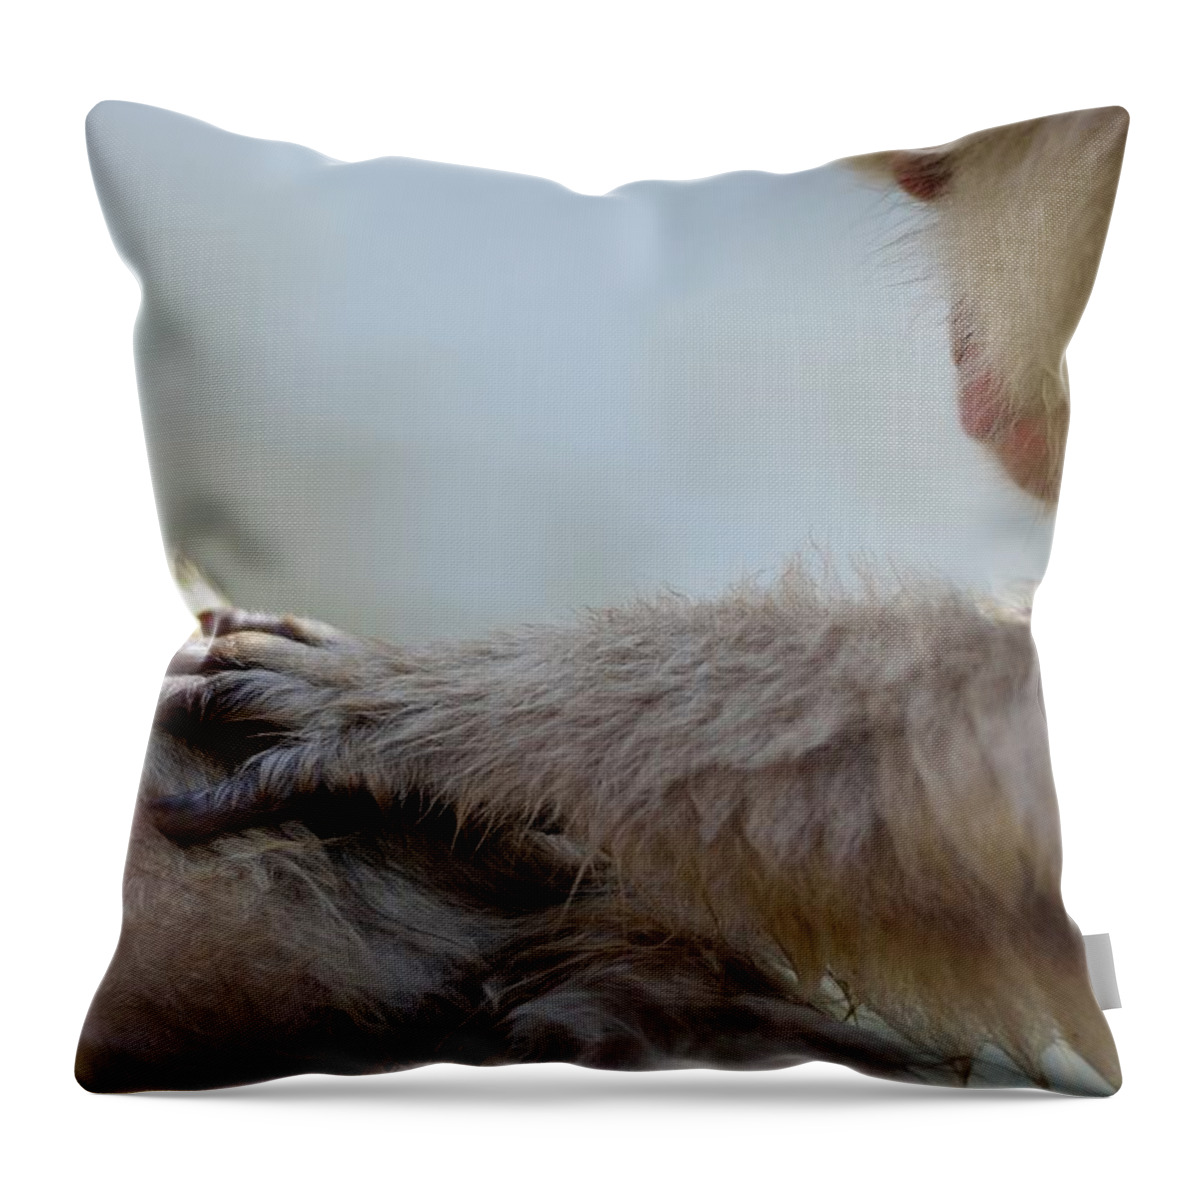 Animal Themes Throw Pillow featuring the photograph Monkey Head Massage by Electravk